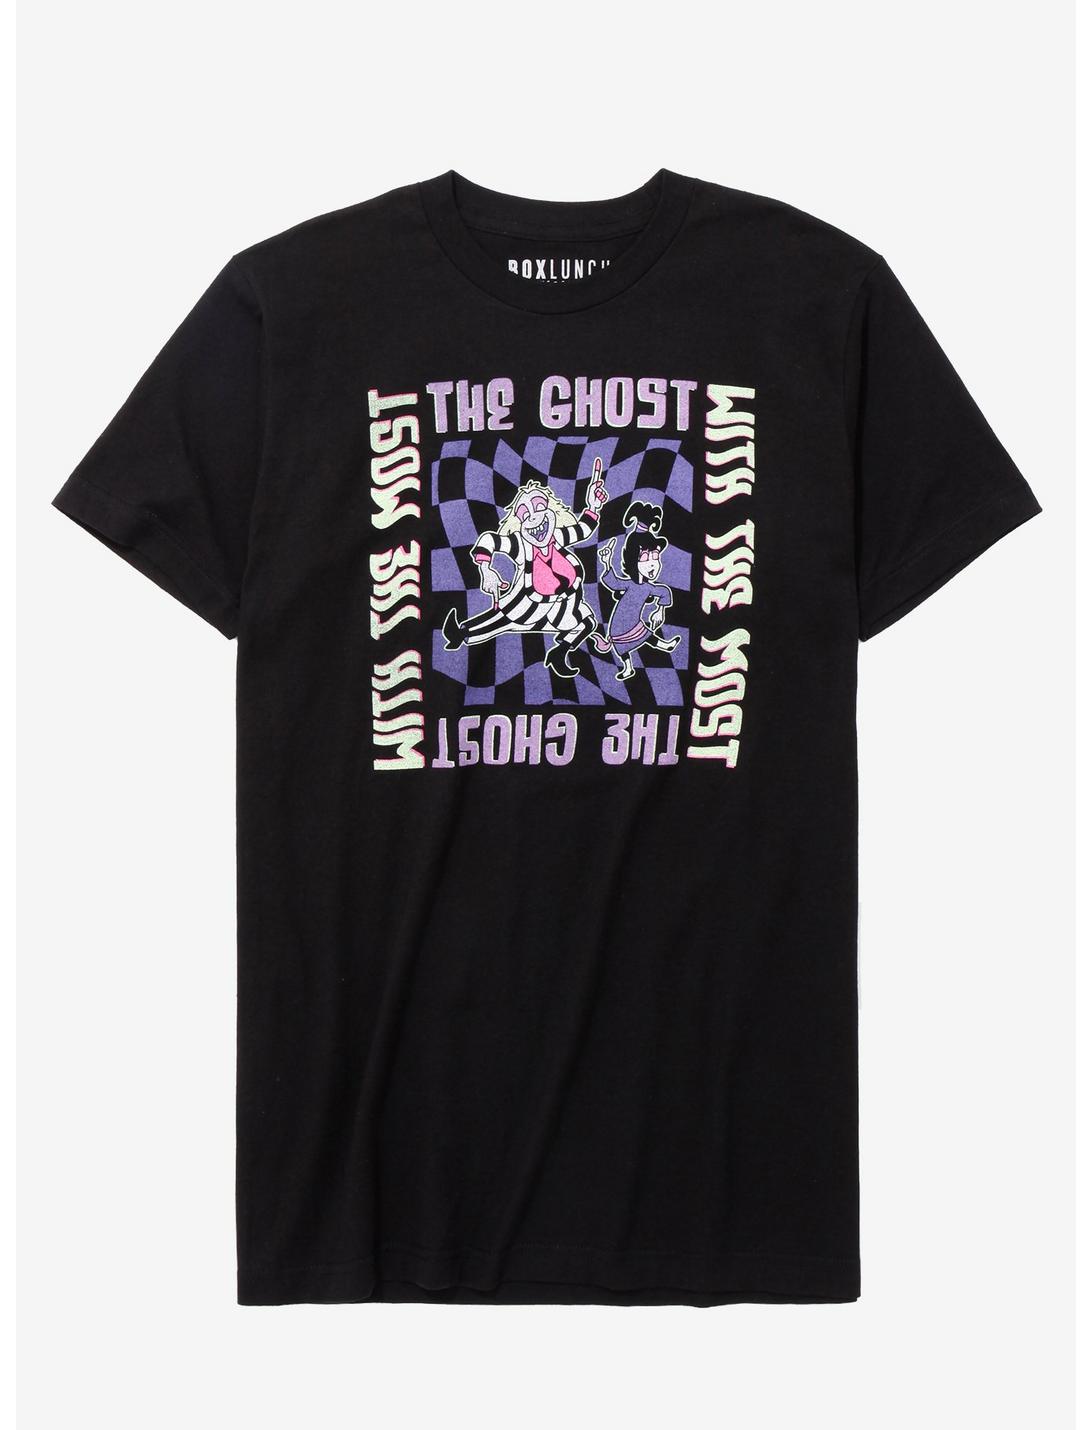 Beetlejuice The Ghost With the Most T-Shirt - BoxLunch Exclusive, BLACK, hi-res